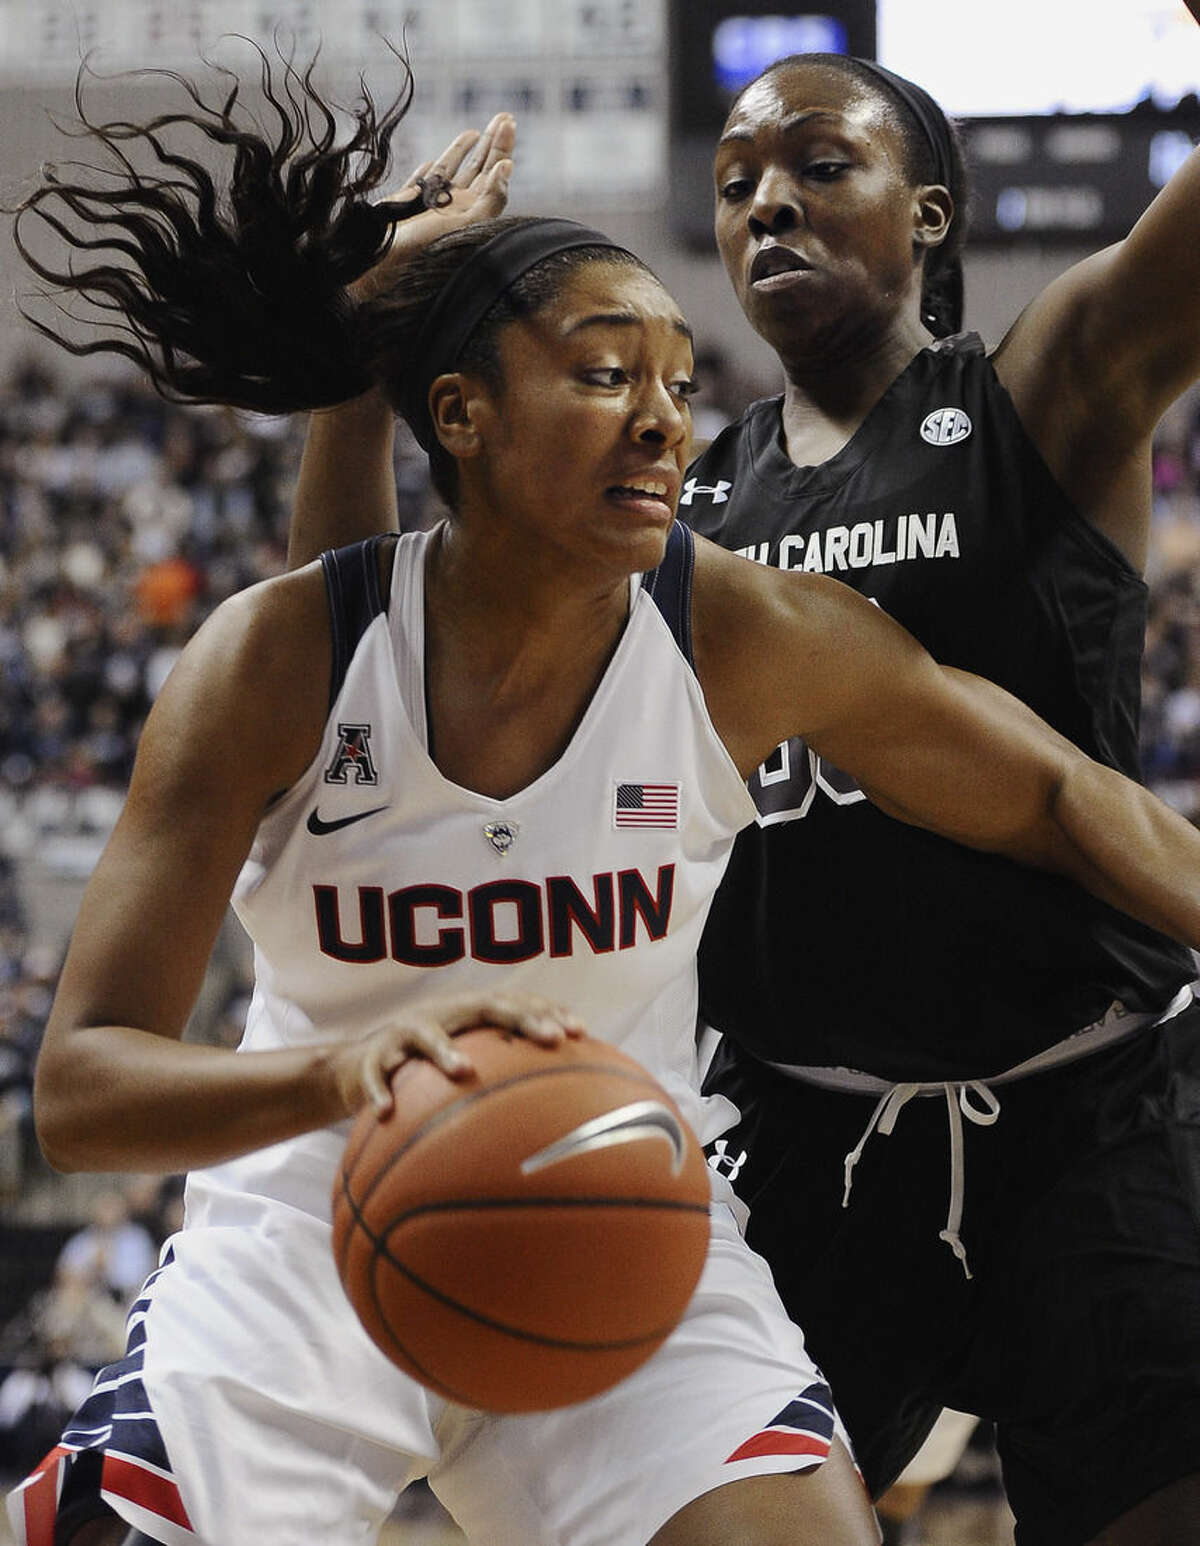 Connecticut’s Morgan Tuck, left, drives to the basket as South Carolina’s Elem Ibiam, right, defends during the first half of an NCAA college basketball game, Monday, Feb. 9, 2015, in Storrs, Conn. (AP Photo/Jessica Hill)